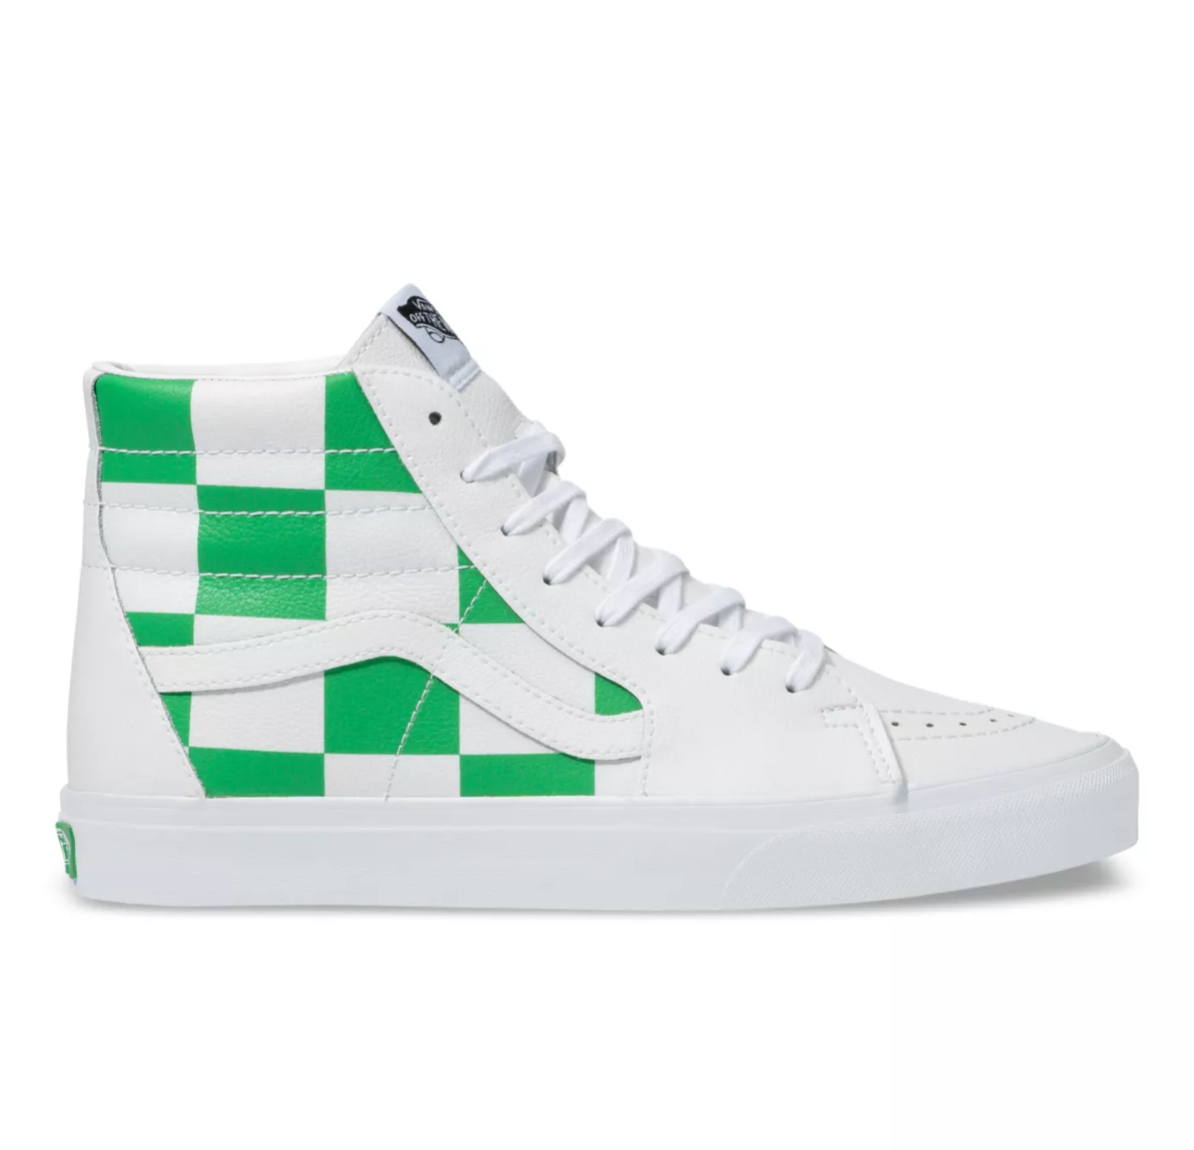 green and white high top vans cheap online